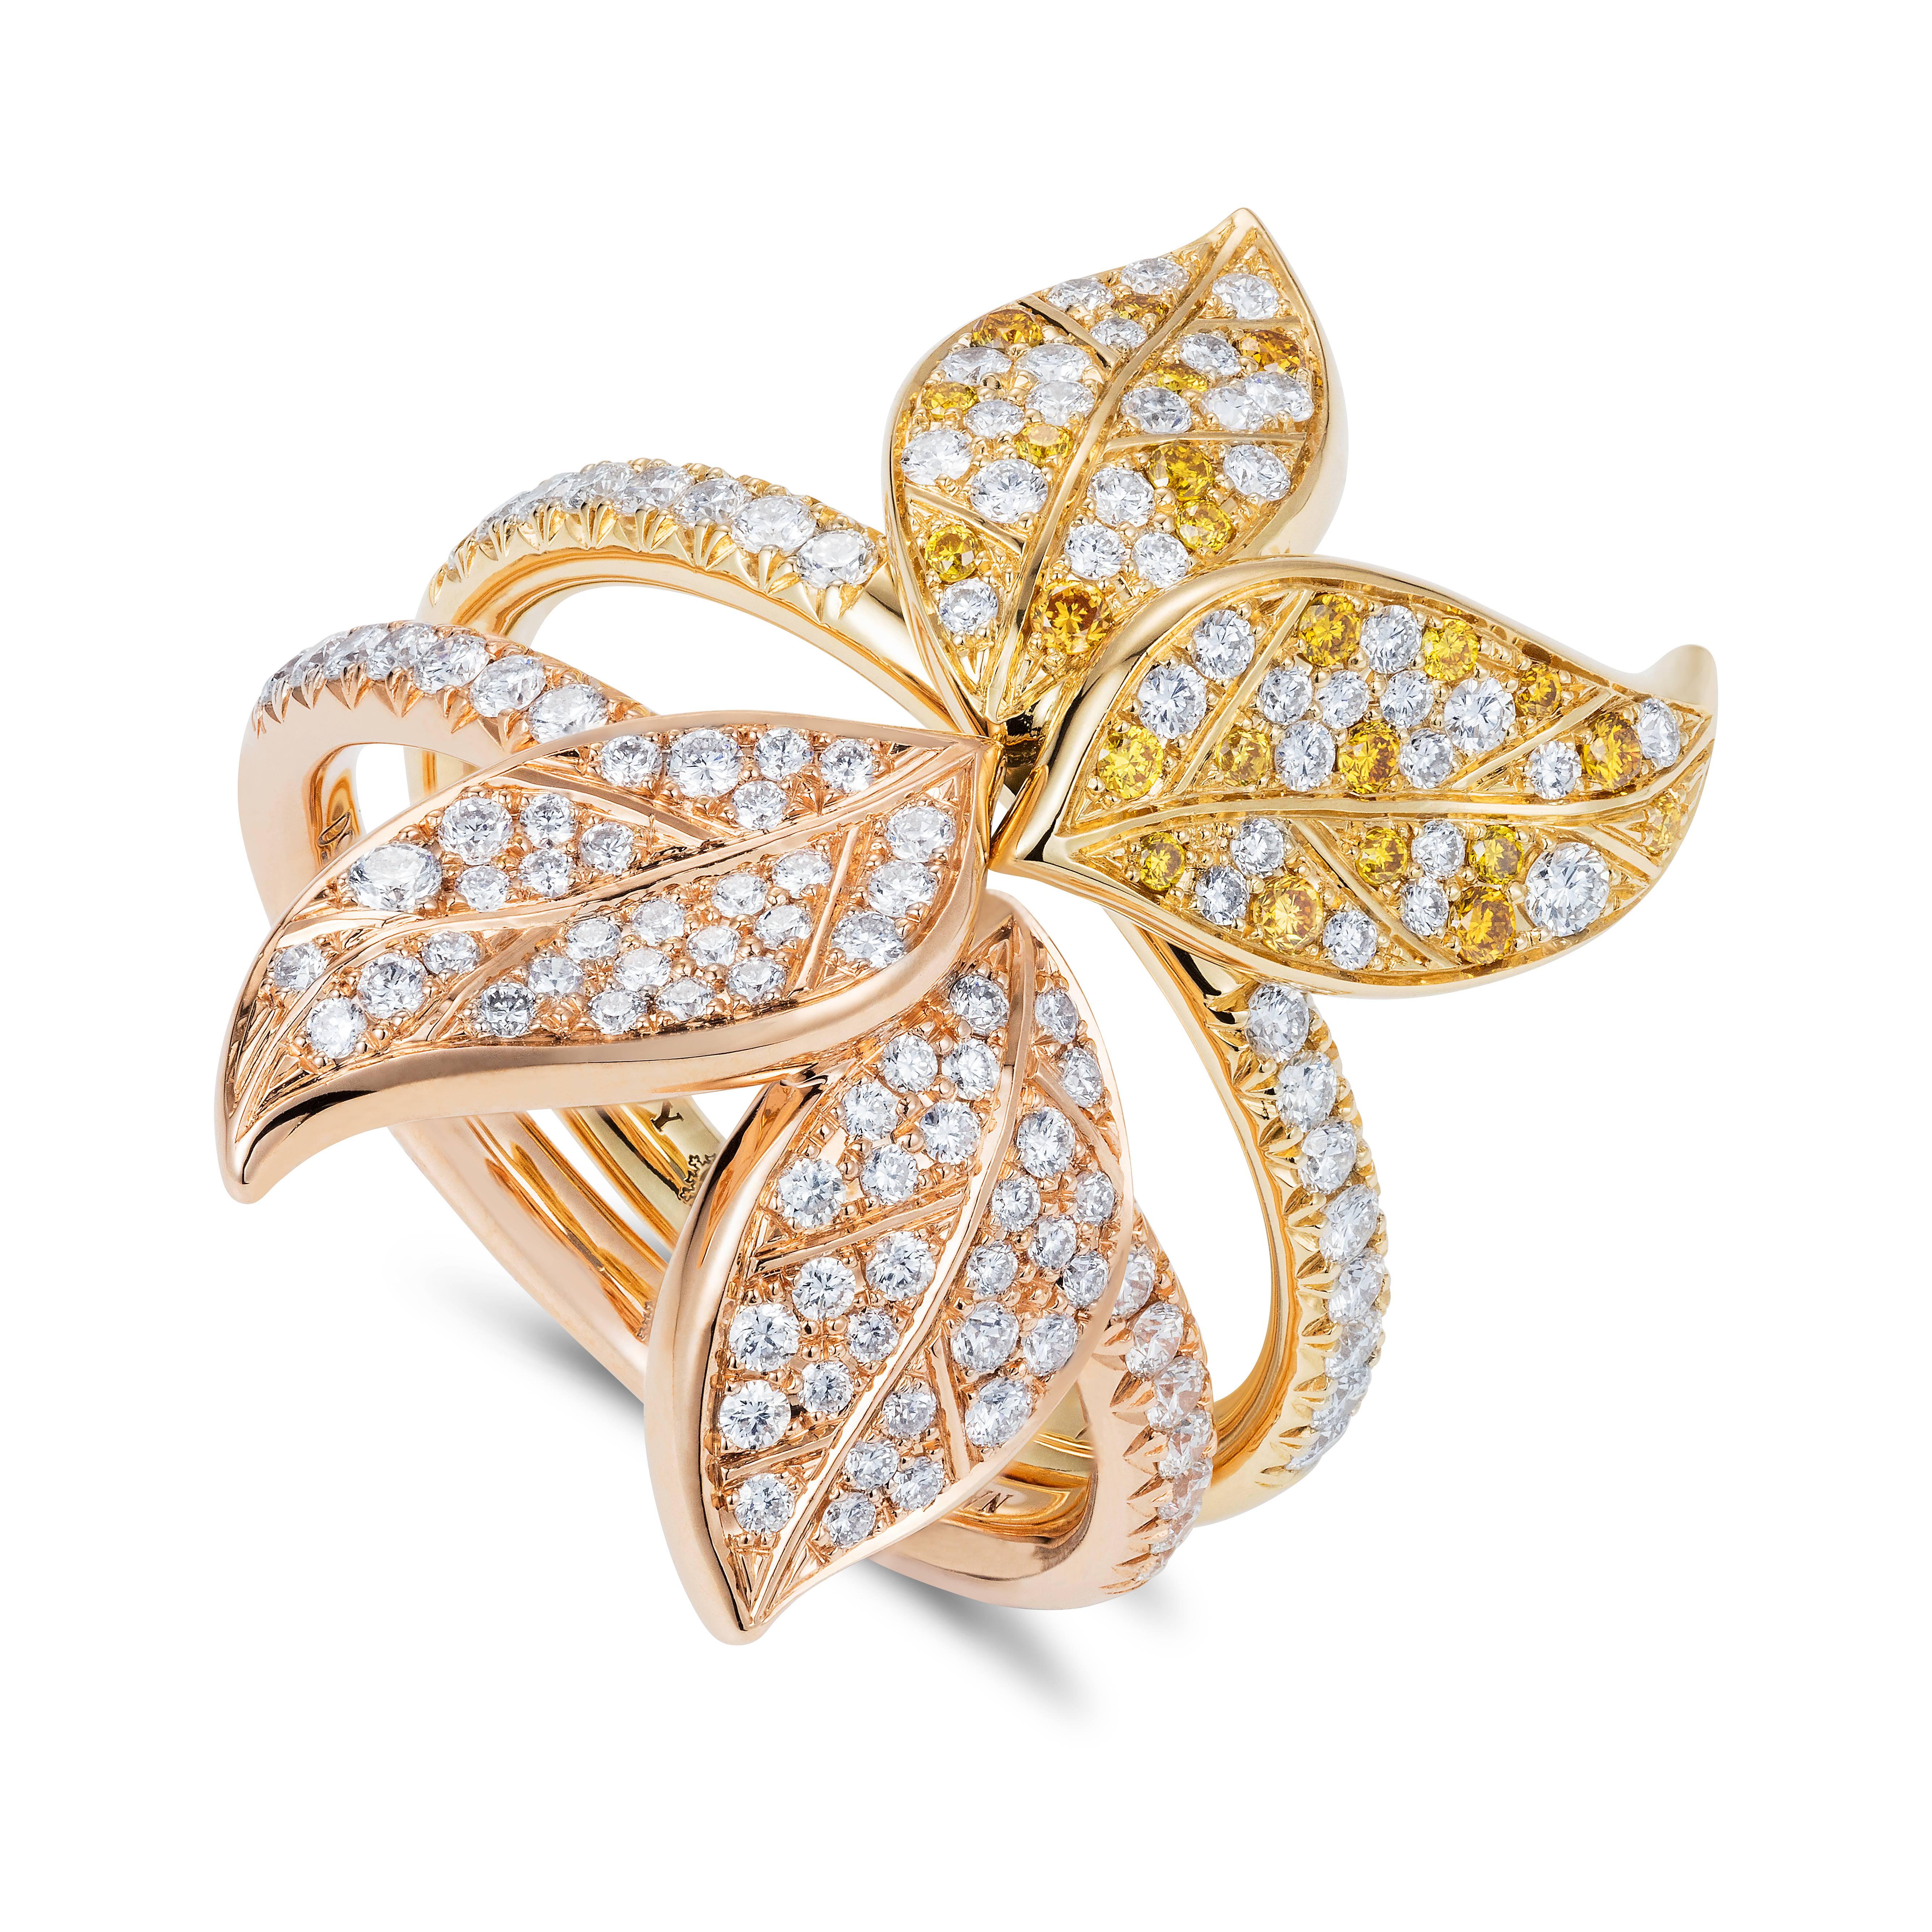 Nadine Aysoy Petite Feuilles 18 Karat Rose Gold and Diamond Ring In New Condition For Sale In London, GB